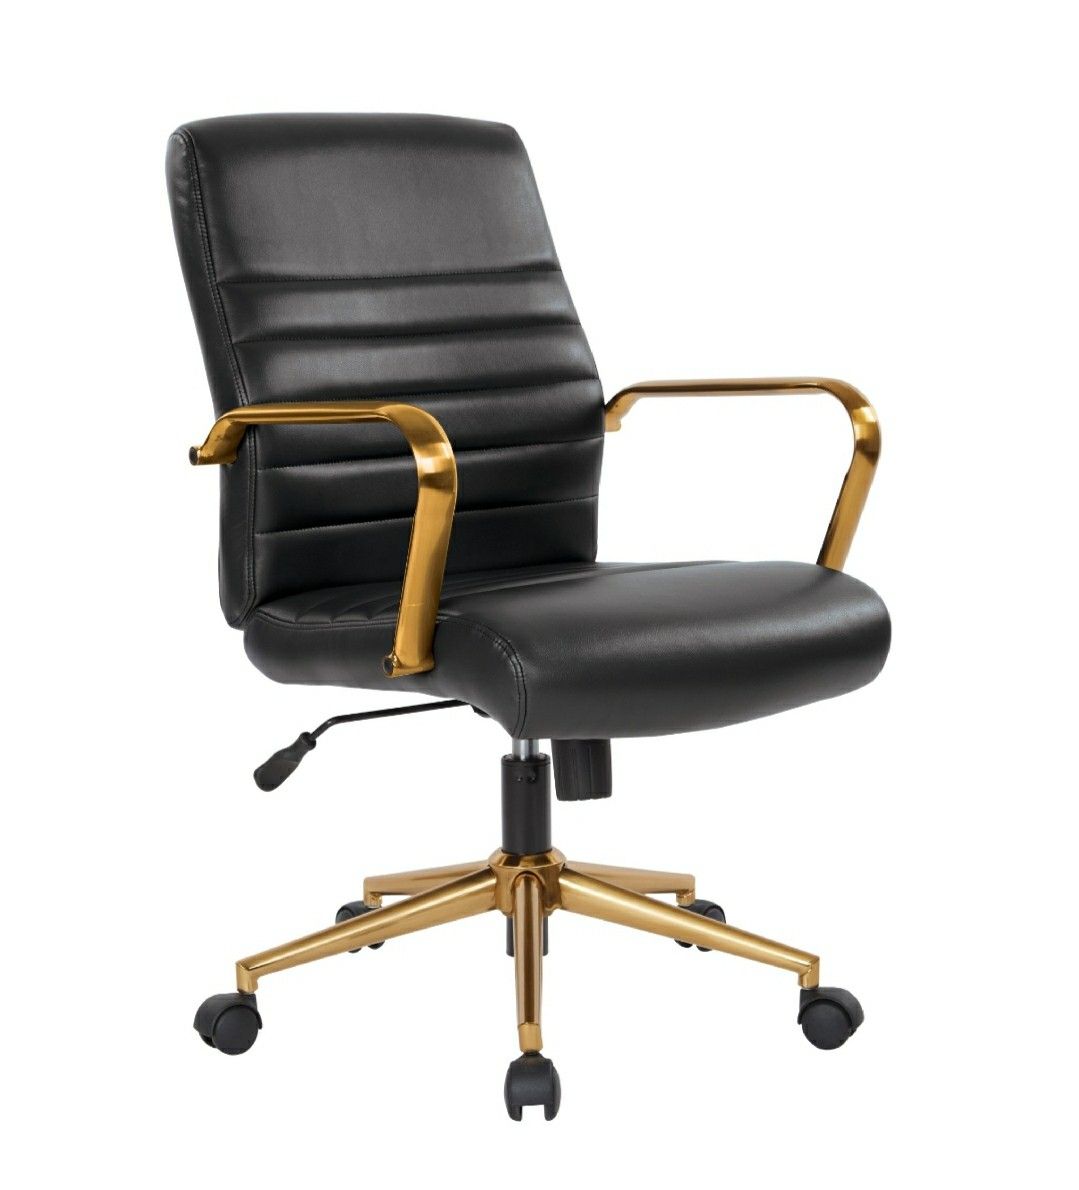 Black and Gold Office Swivel Chair, High Backrest with Arm Rest